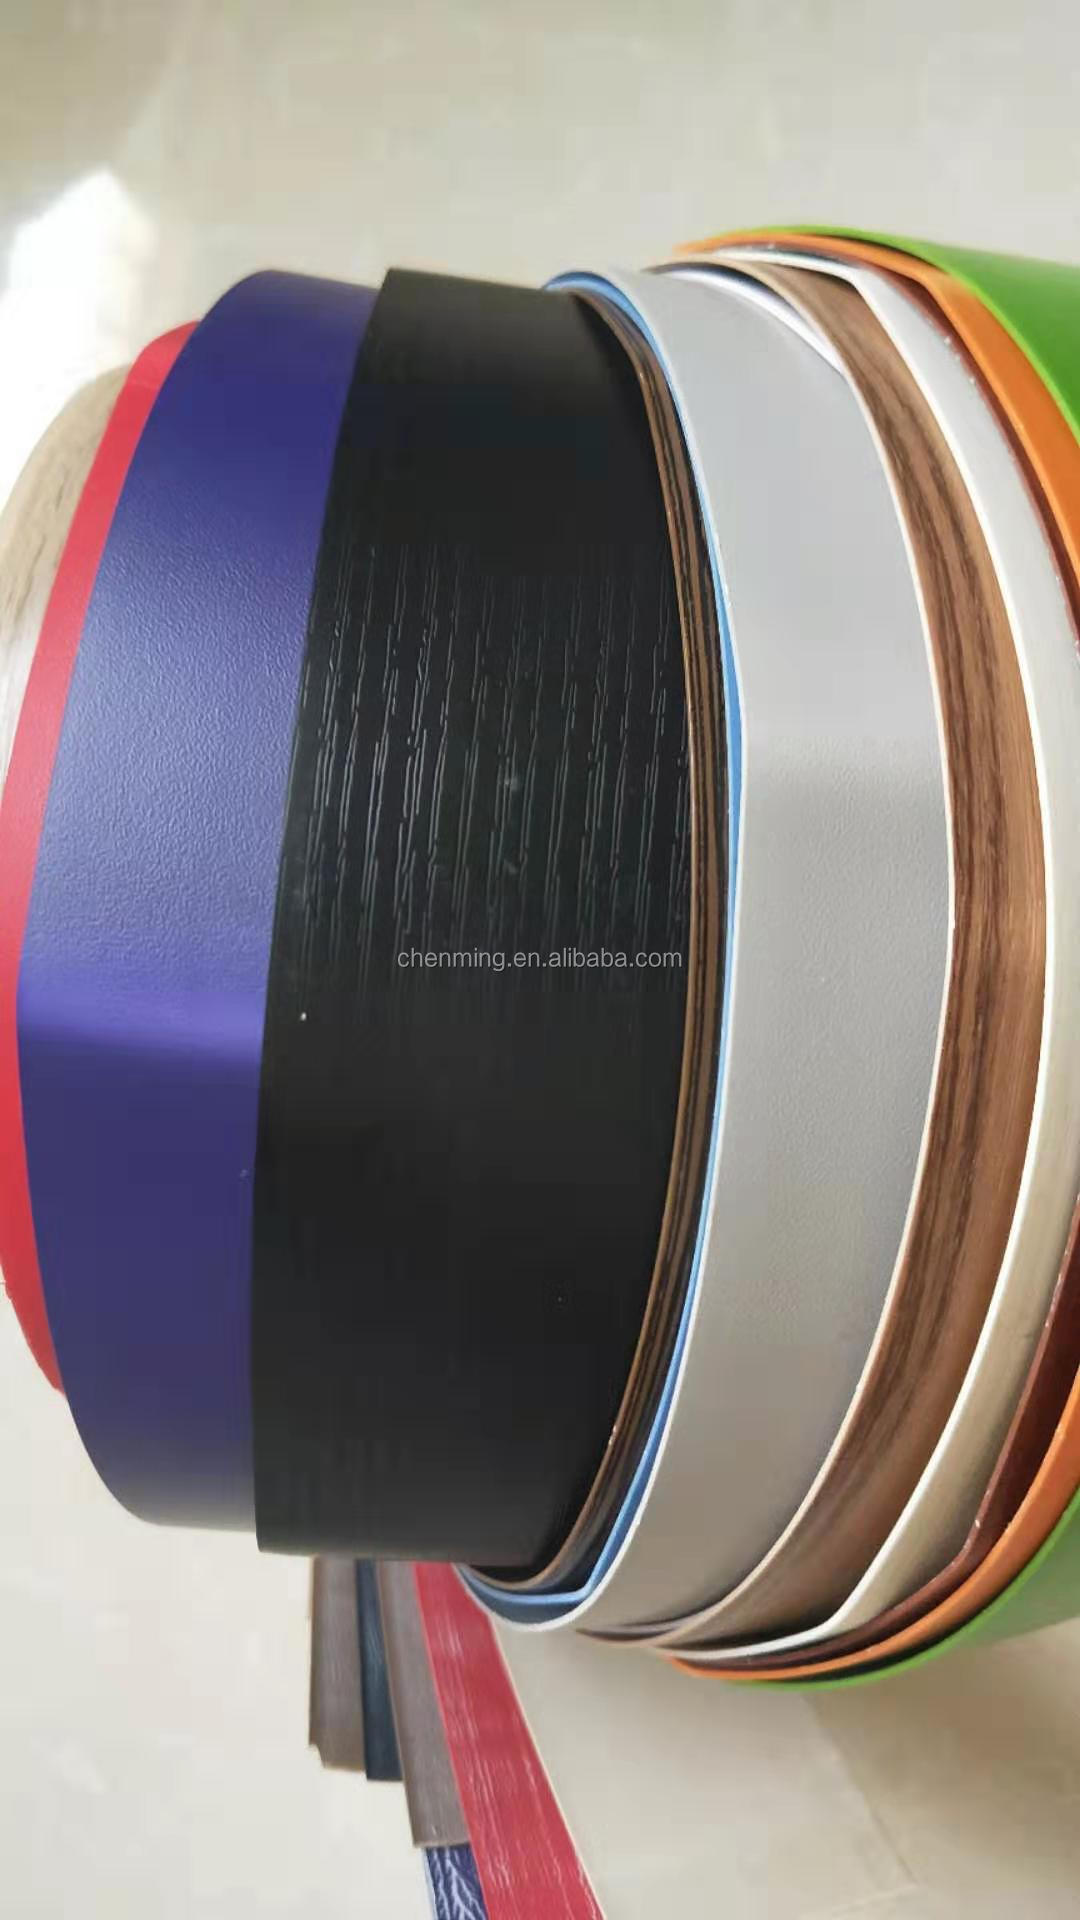 1*48mm PVC edge banding for home decoration